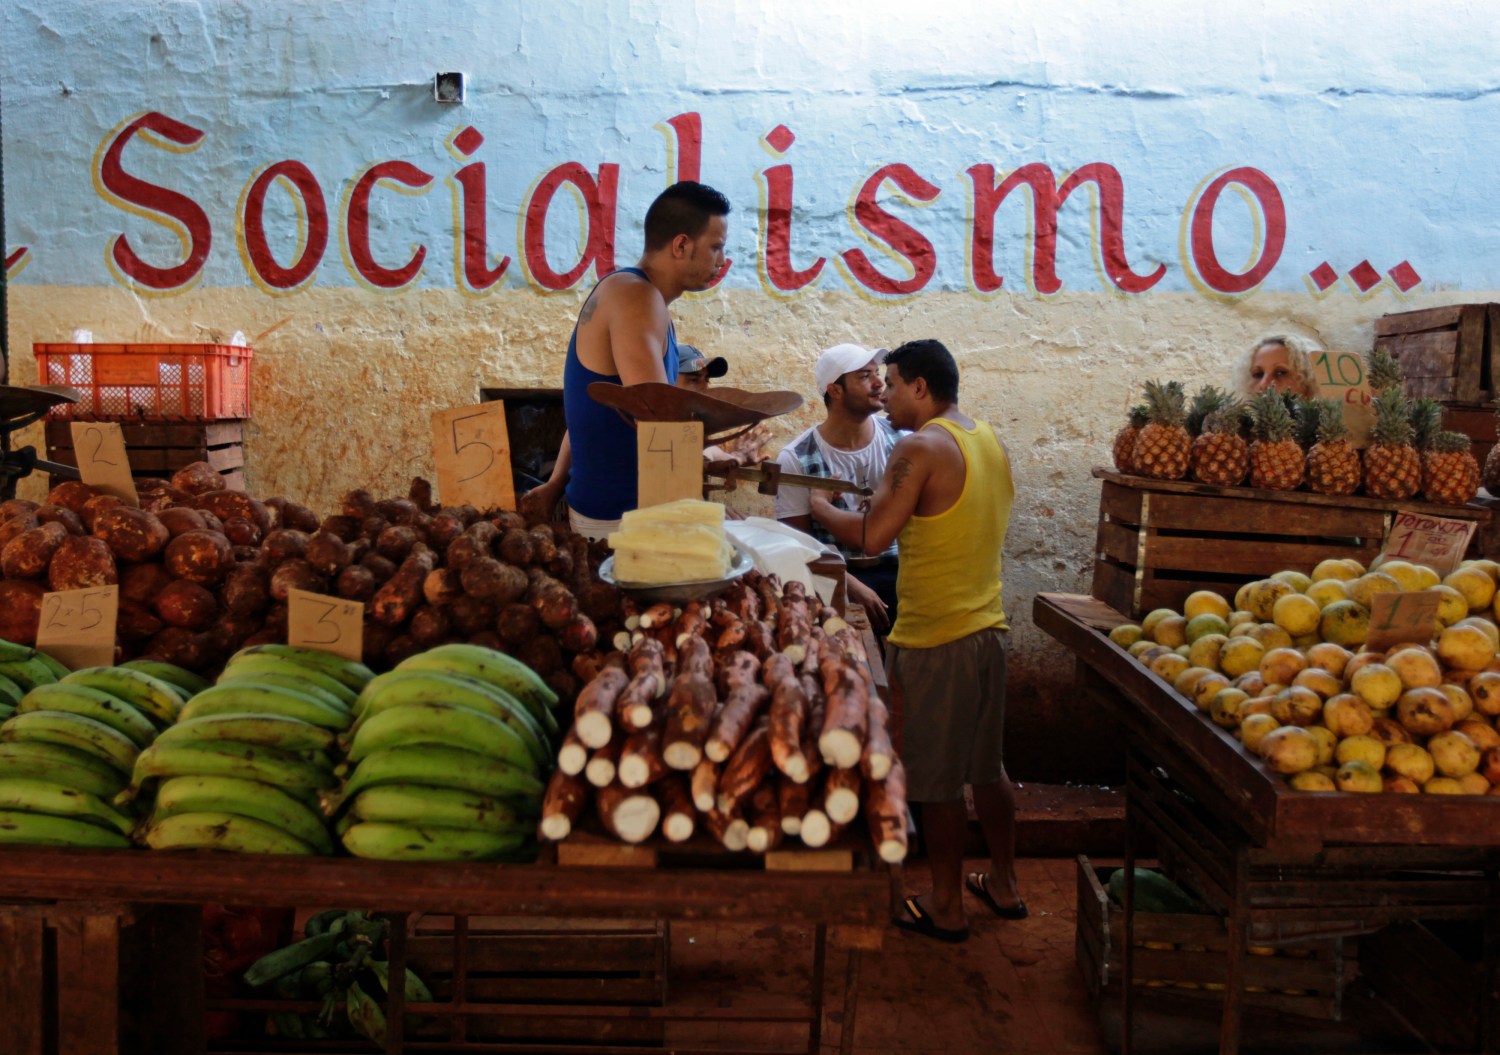 Vendors wait for customers at their stalls, with prices tagged in Cuban pesos, at a market in Havana October 23, 2013. Cuba took the first step towards scrapping its two-tier currency on October 22, 2013, in a move which could boost local workers' income and remove a major hurdle for importers and exporters. Cuba's convertible peso (CUC) is pegged to the U.S. dollar, while the local peso (CUP) is valued at a fraction of the greenback's value, angering the population which is paid in the latter, and complicating accounting, the evaluation of performance, and trade for state companies. The writing on the wall in the background reads, "Socialism". REUTERS/Desmond Boylan (CUBA - Tags: SOCIETY BUSINESS AGRICULTURE) - RTX14LG0